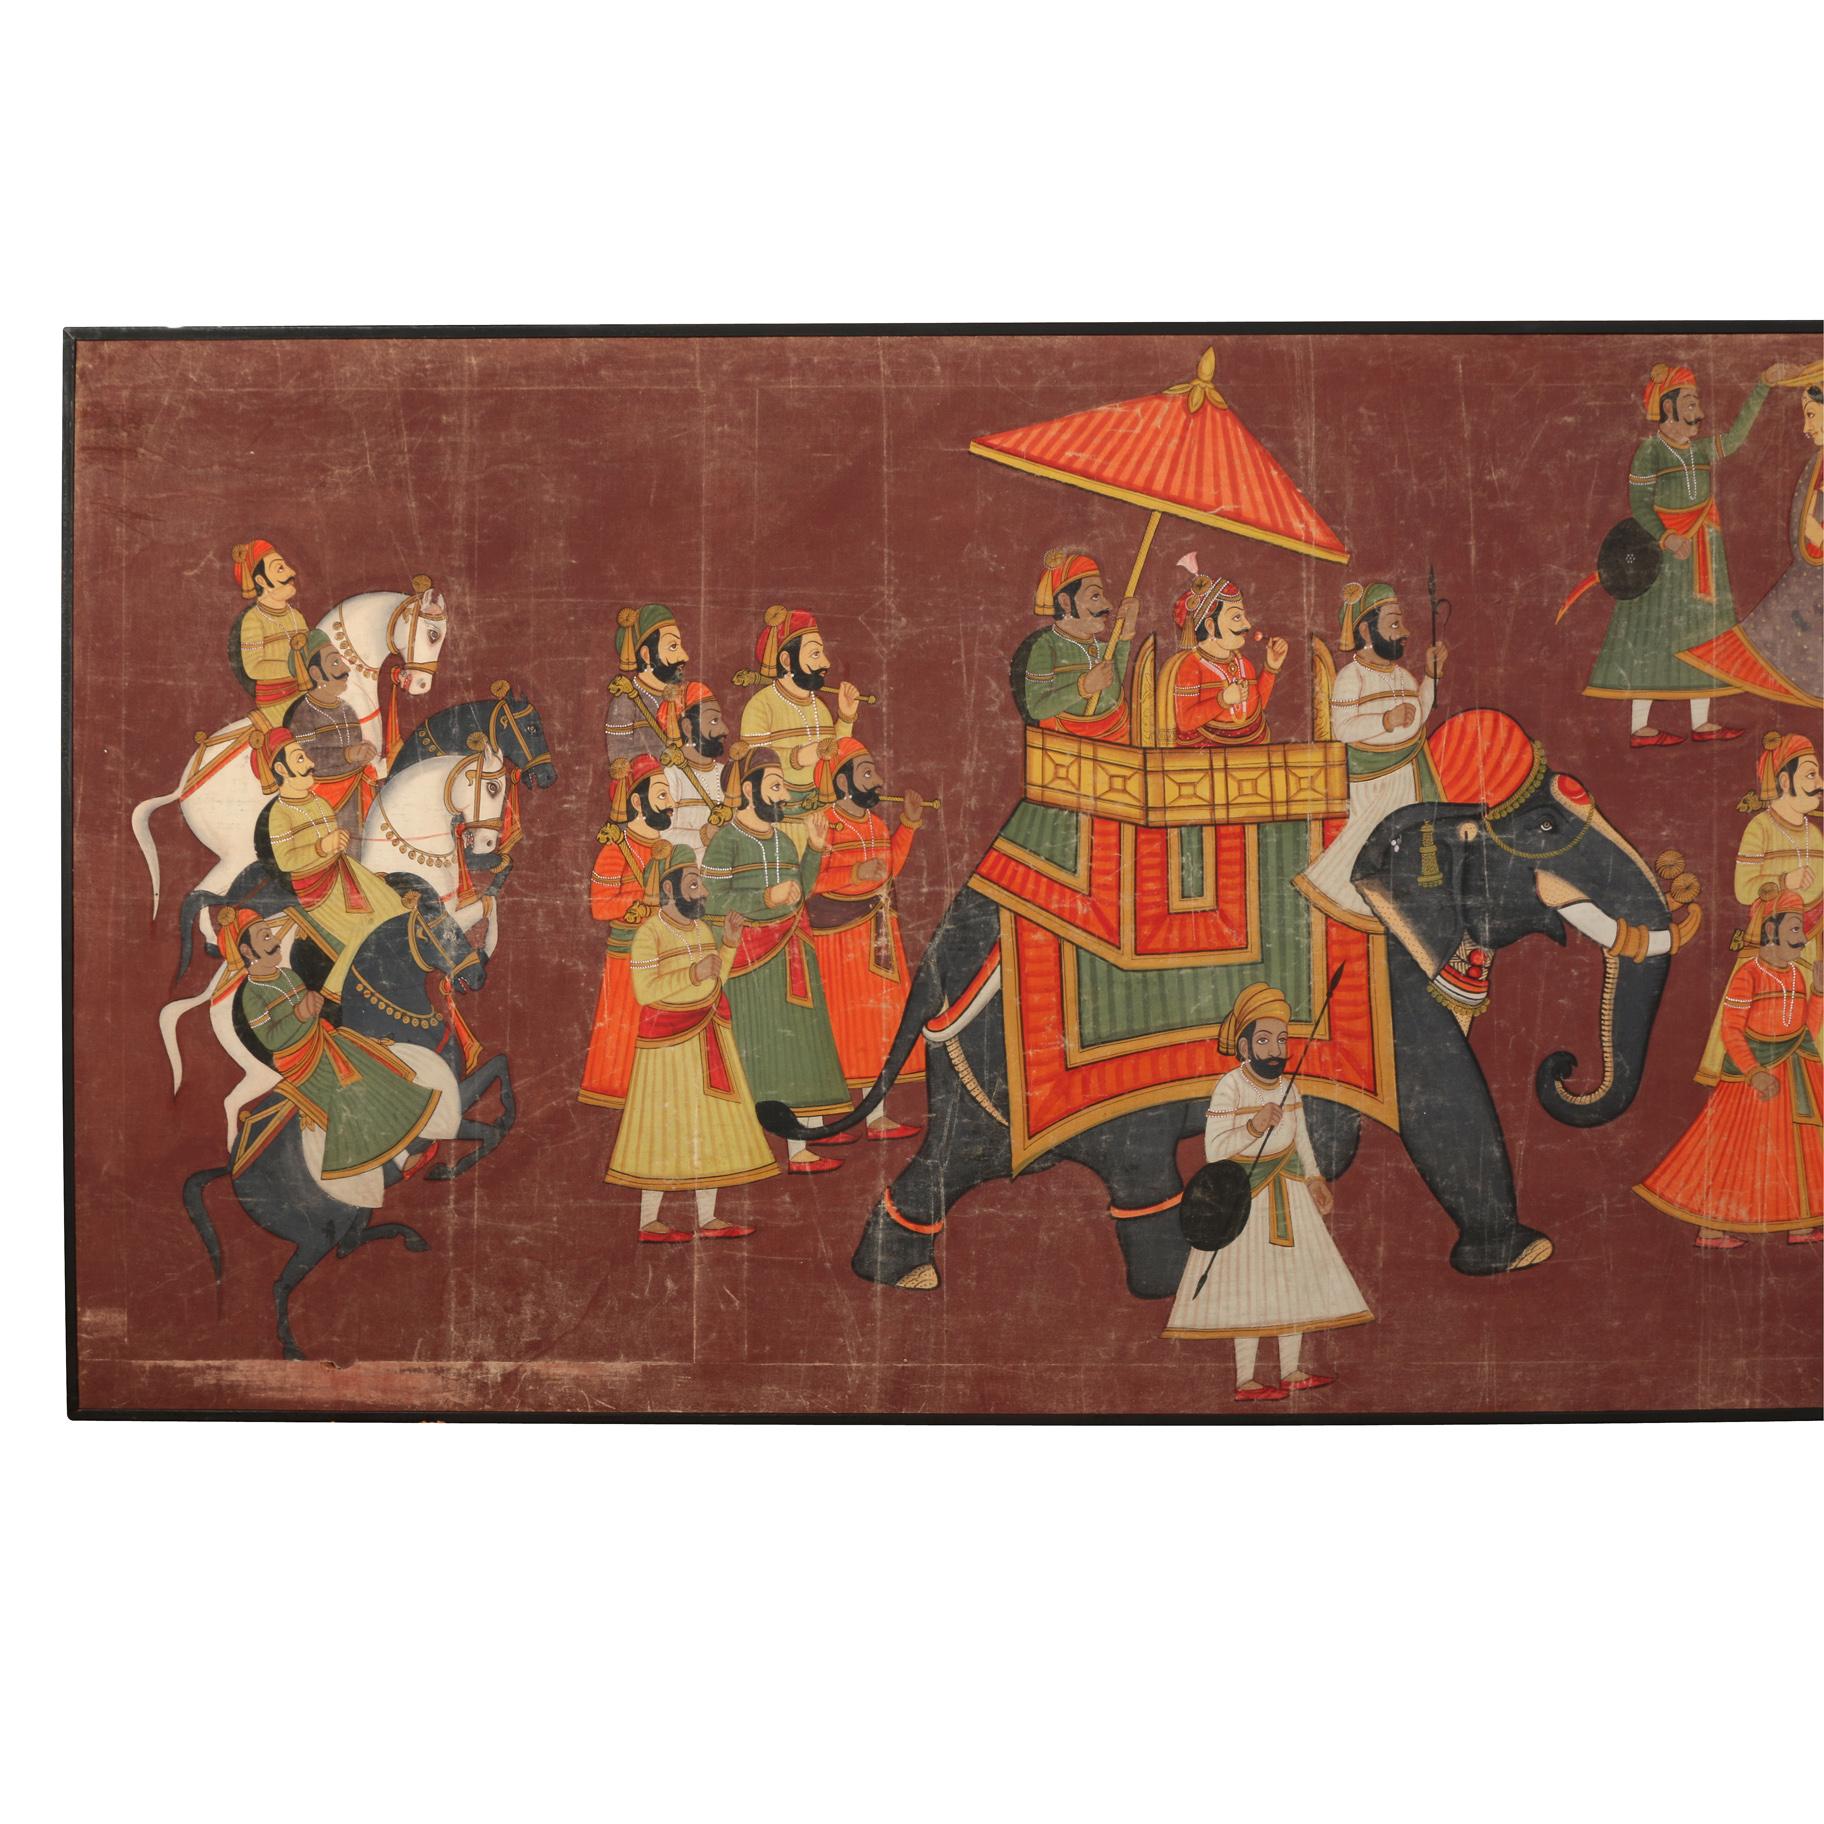 A monumental work gouache on silk linen, depicting a procession of figures, horses and an elephant painted on a panel and framed.